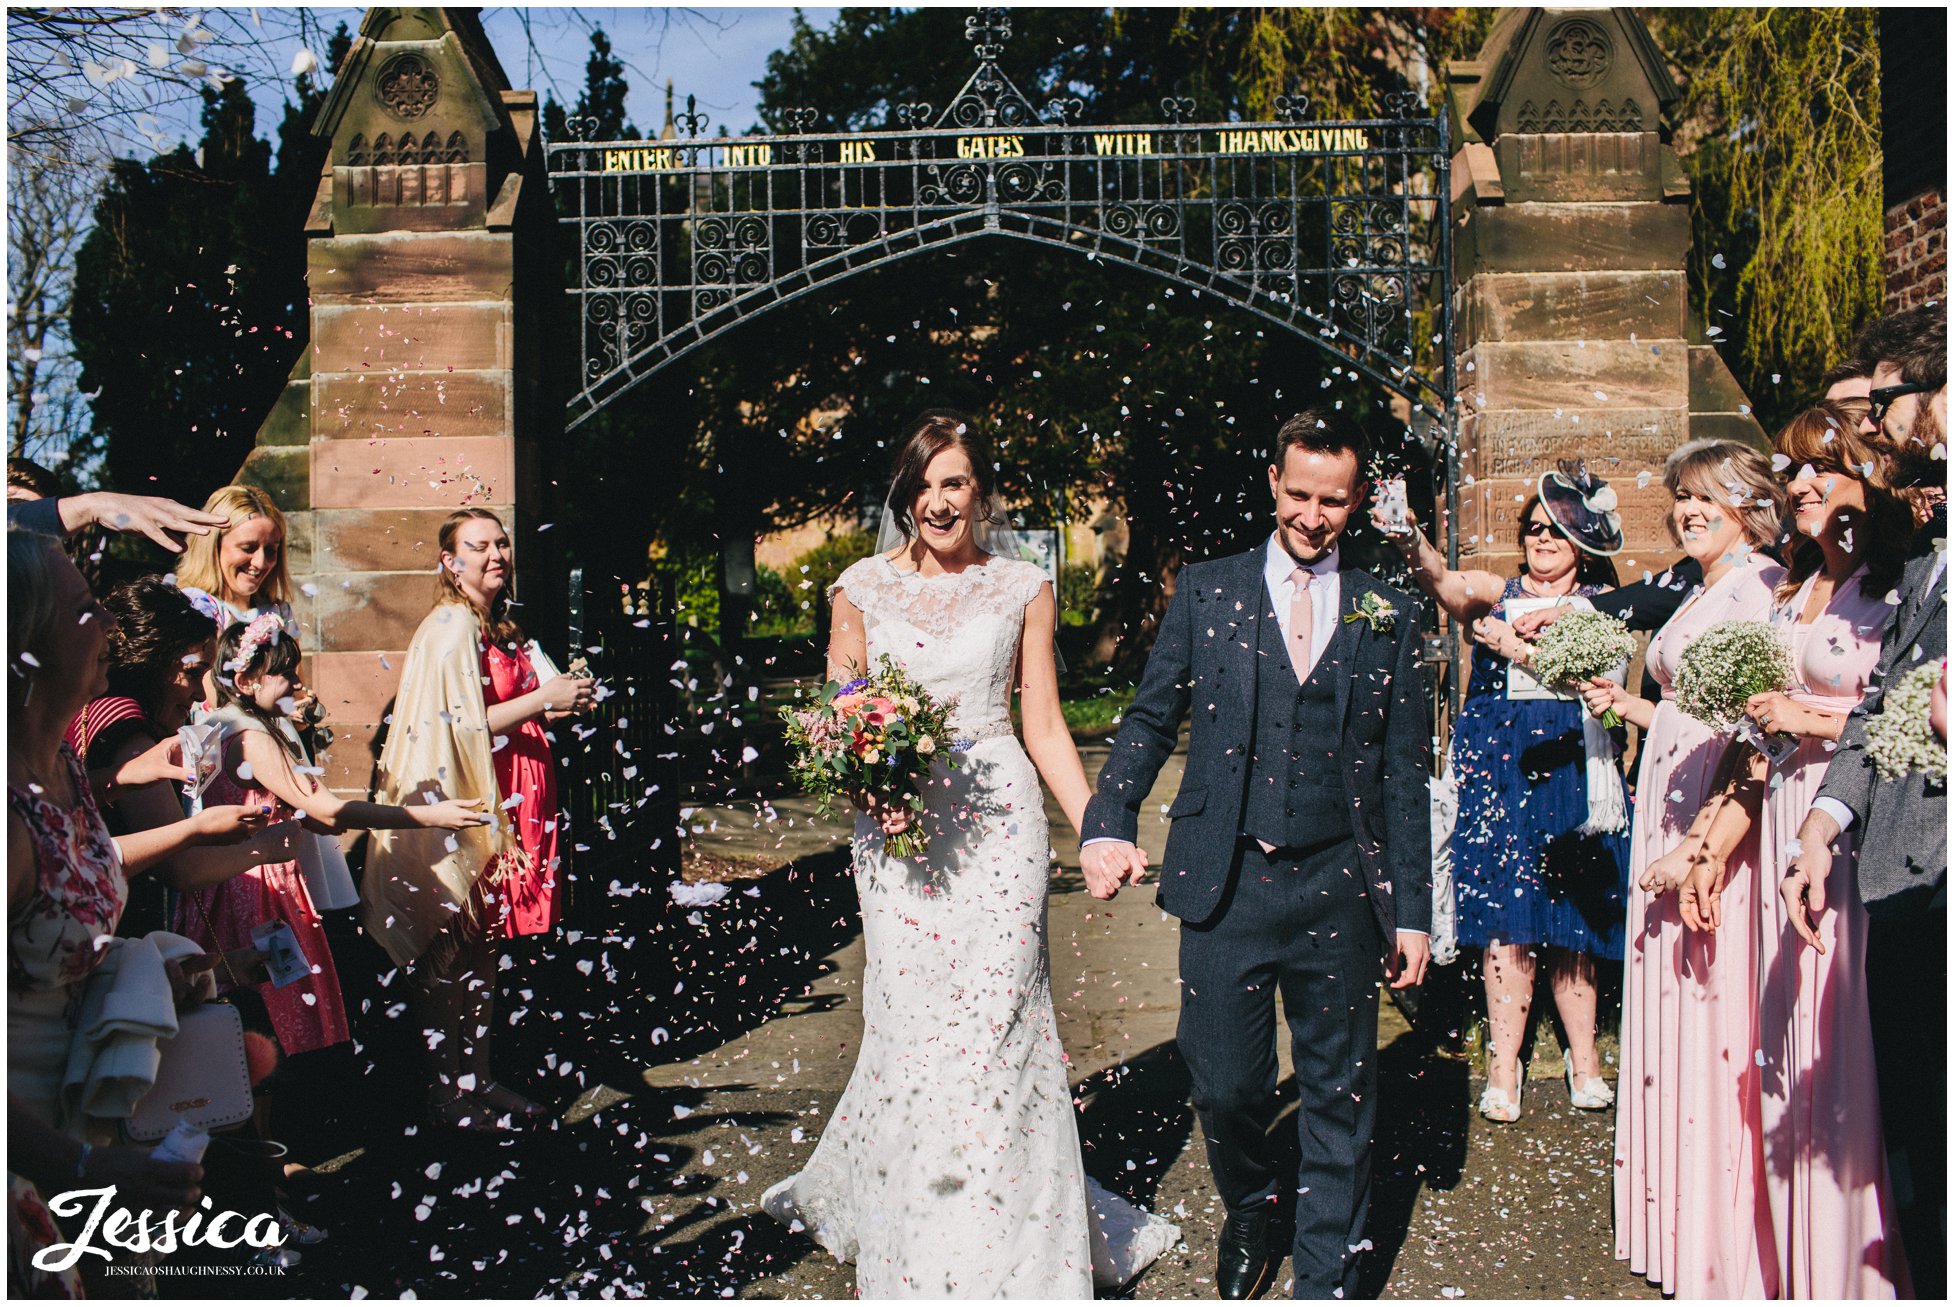 guests throw confetti and the bride and groom leave for their reception